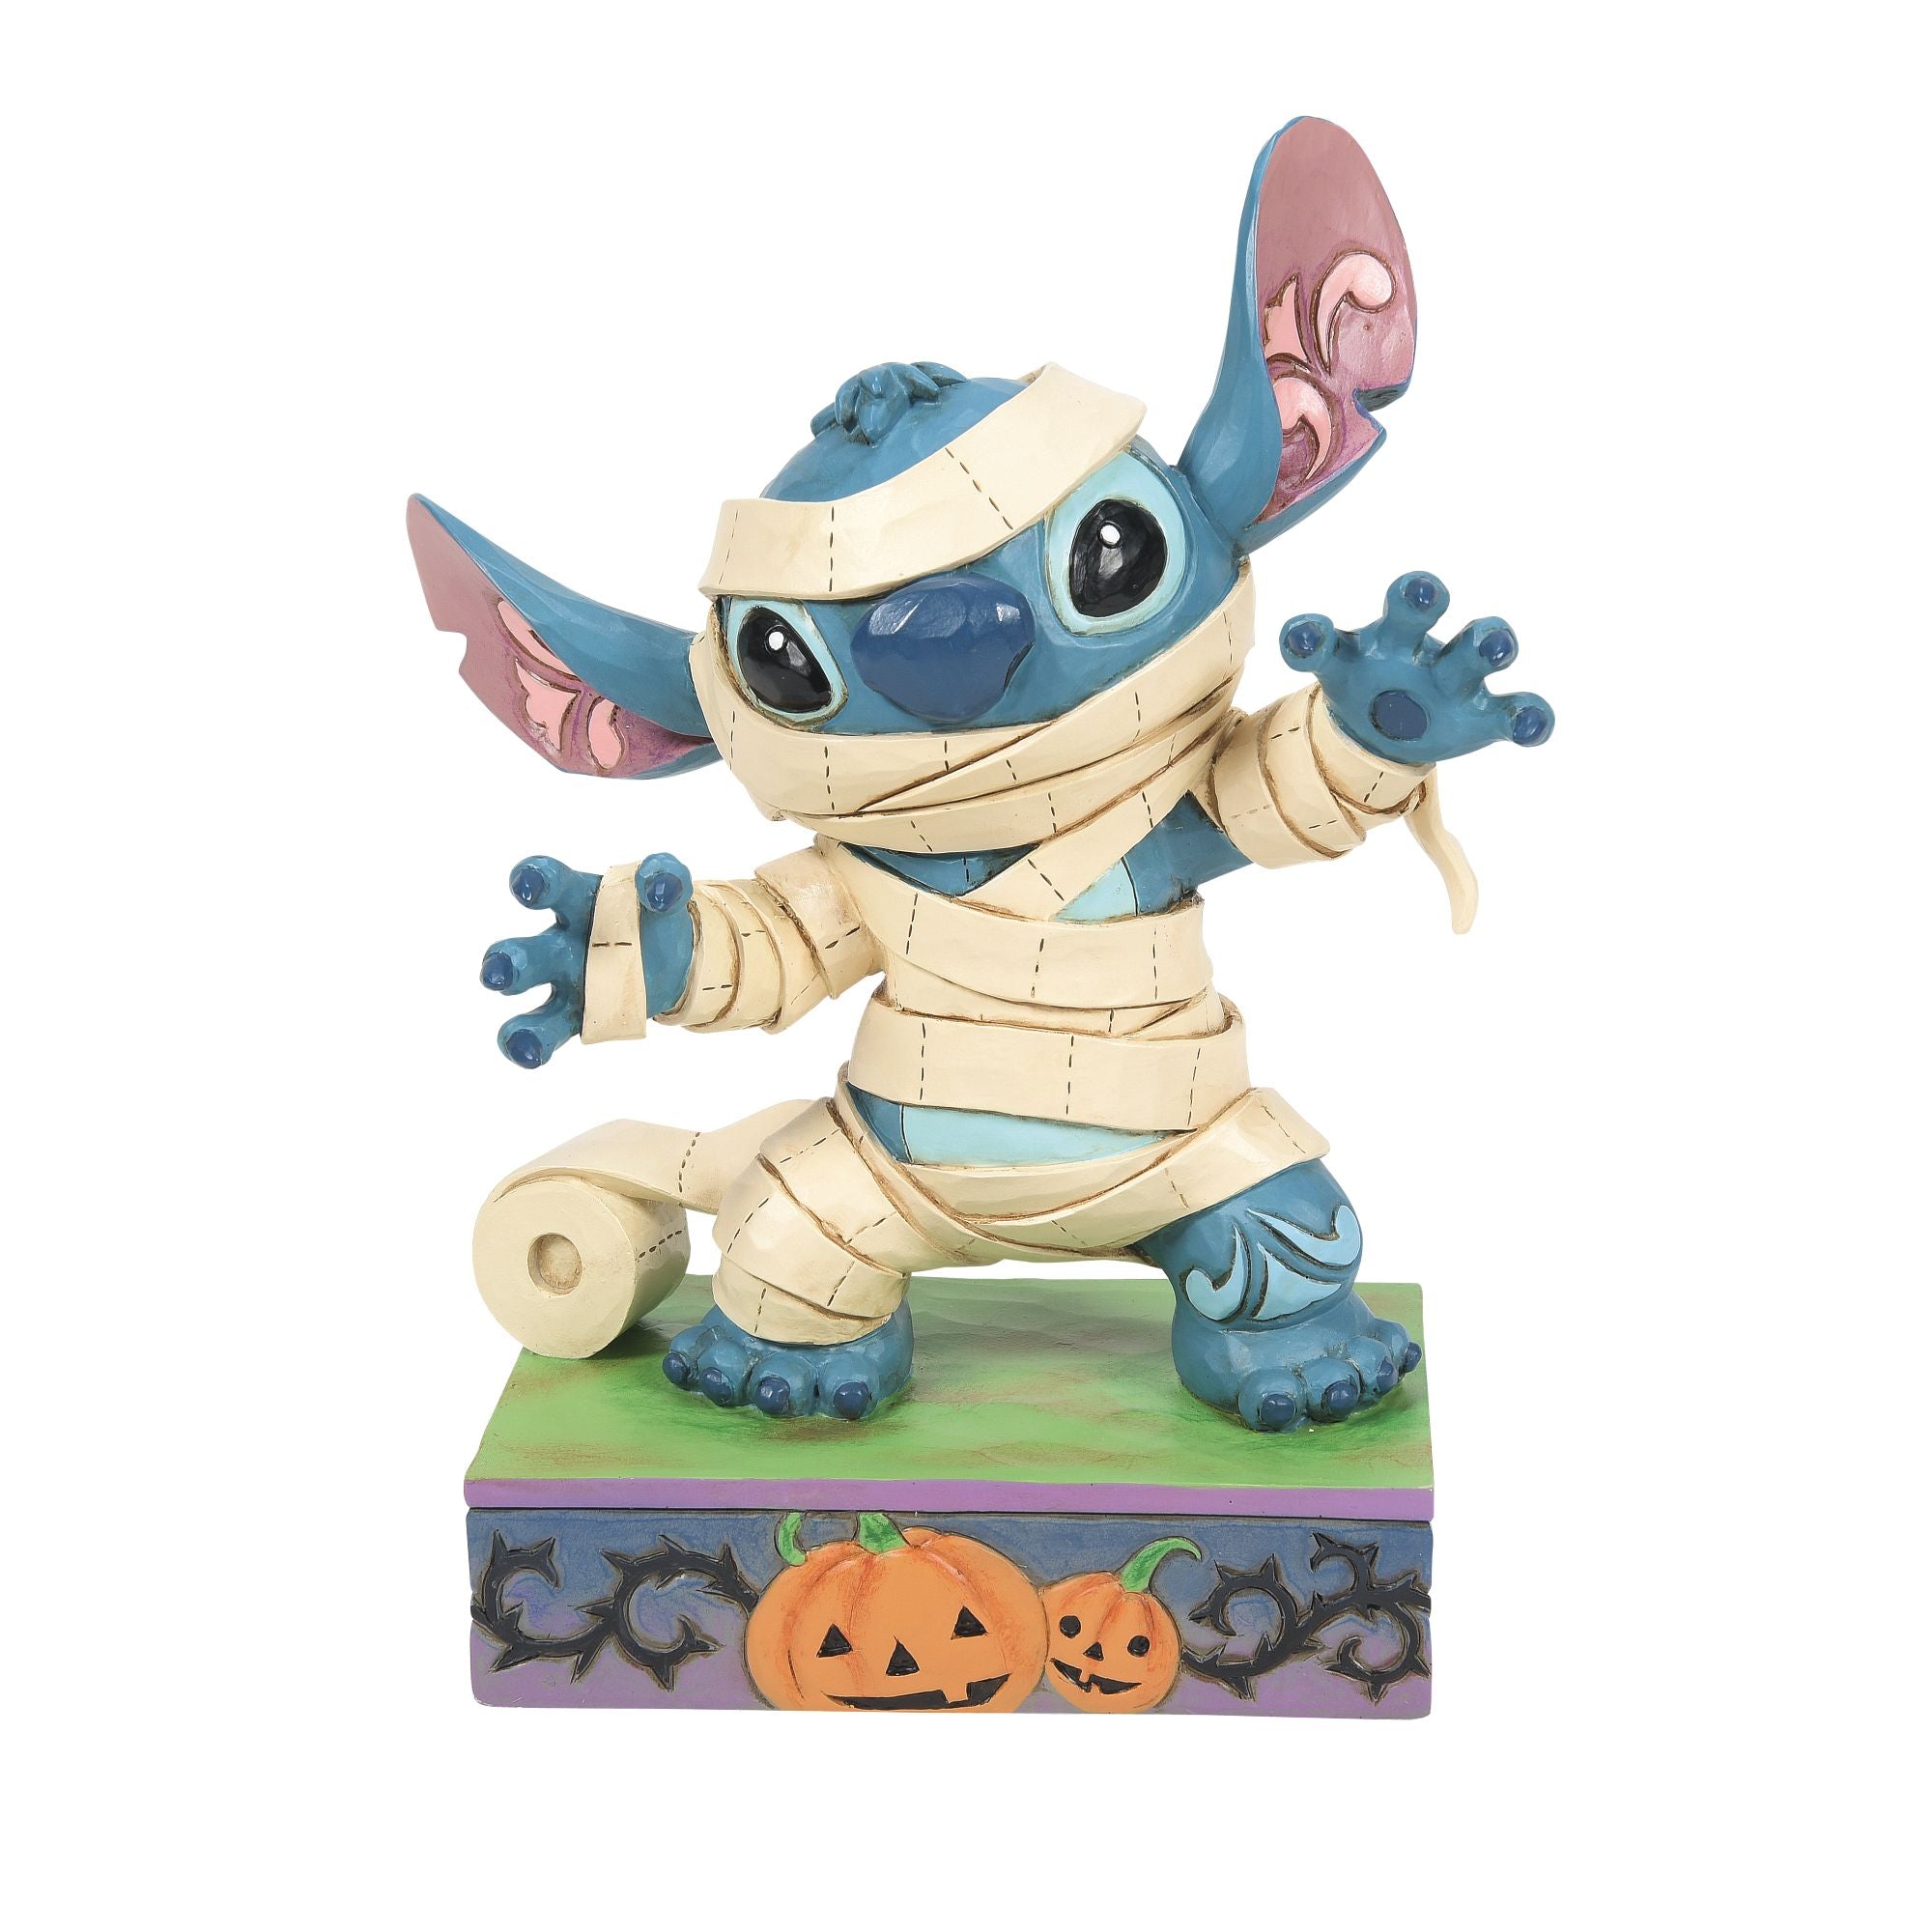 Disney Traditions Stitch in Easter Egg Figurine by Jim Shore, 6011919